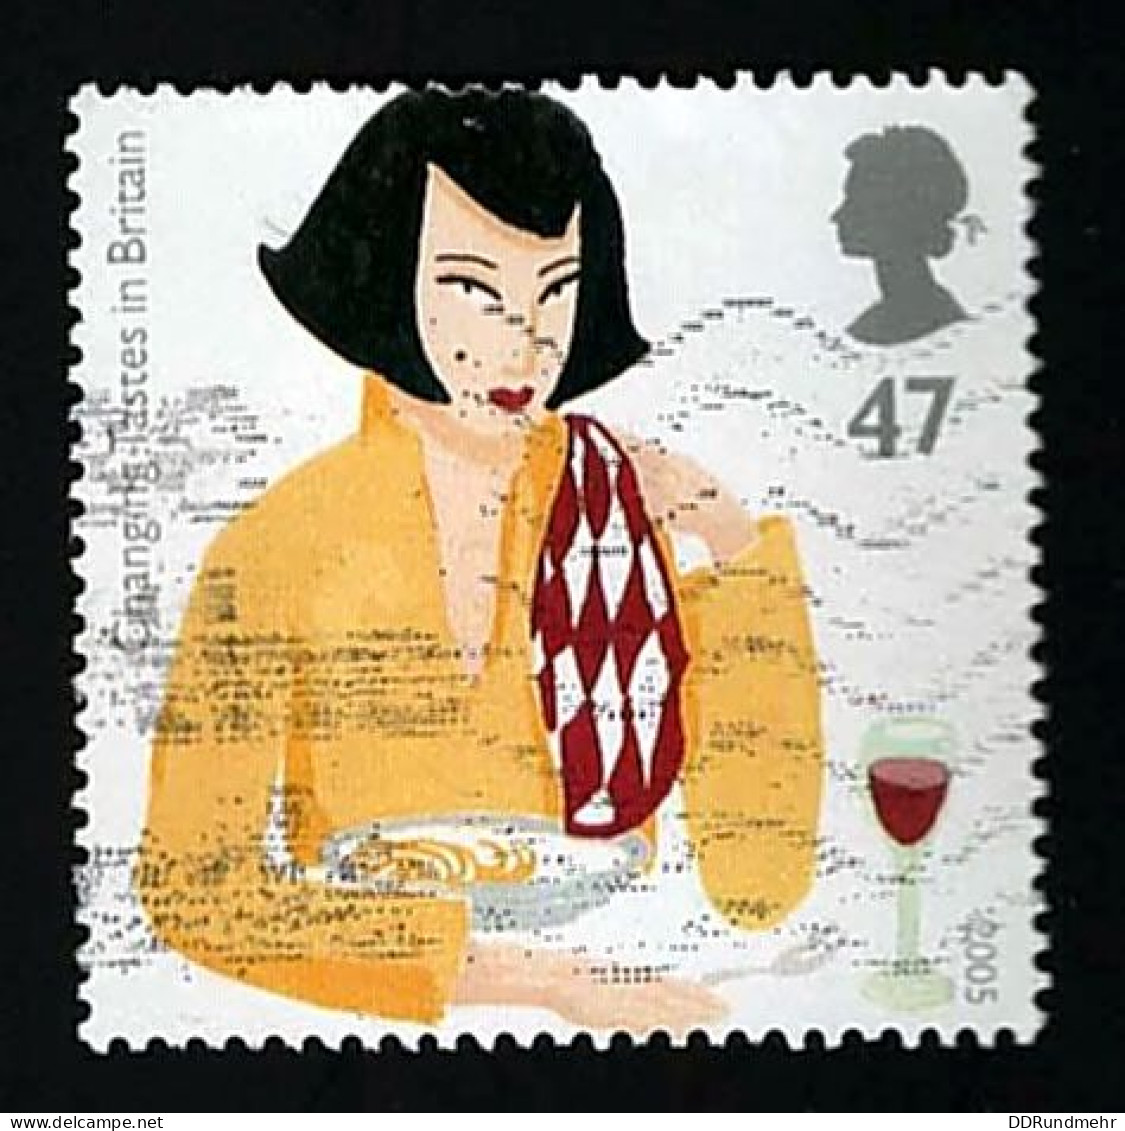 2005 Gastronomy  Michel GB 2329 Stamp Number GB 2305 Yvert Et Tellier GB 2675 Stanley Gibbons GB 2558 Used - Used Stamps